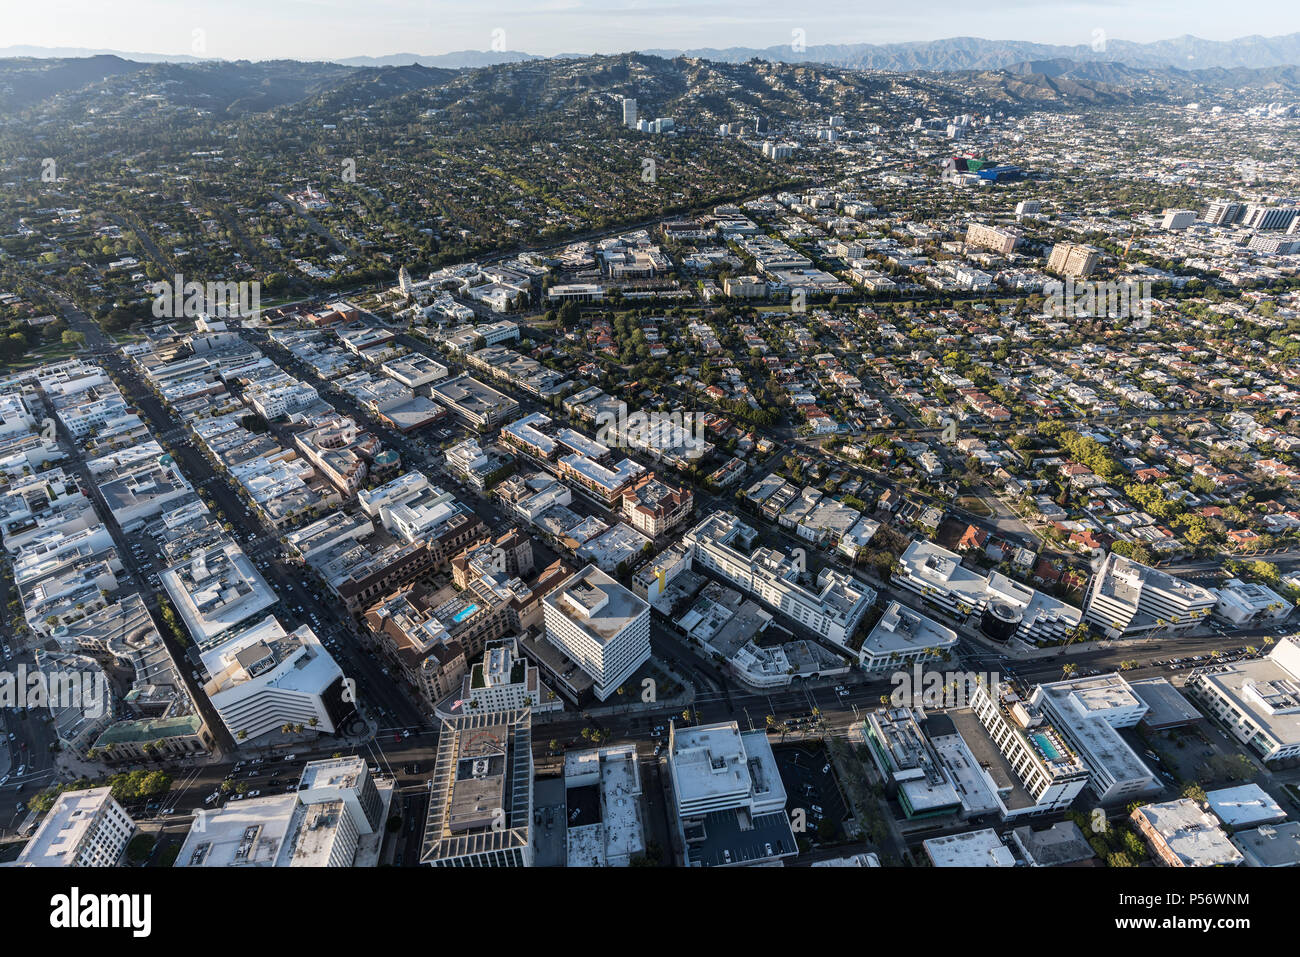 Aerial view of Beverly Hills California with West Hollywood, Los Angeles and the Santa Monica Mountains in background. Stock Photo